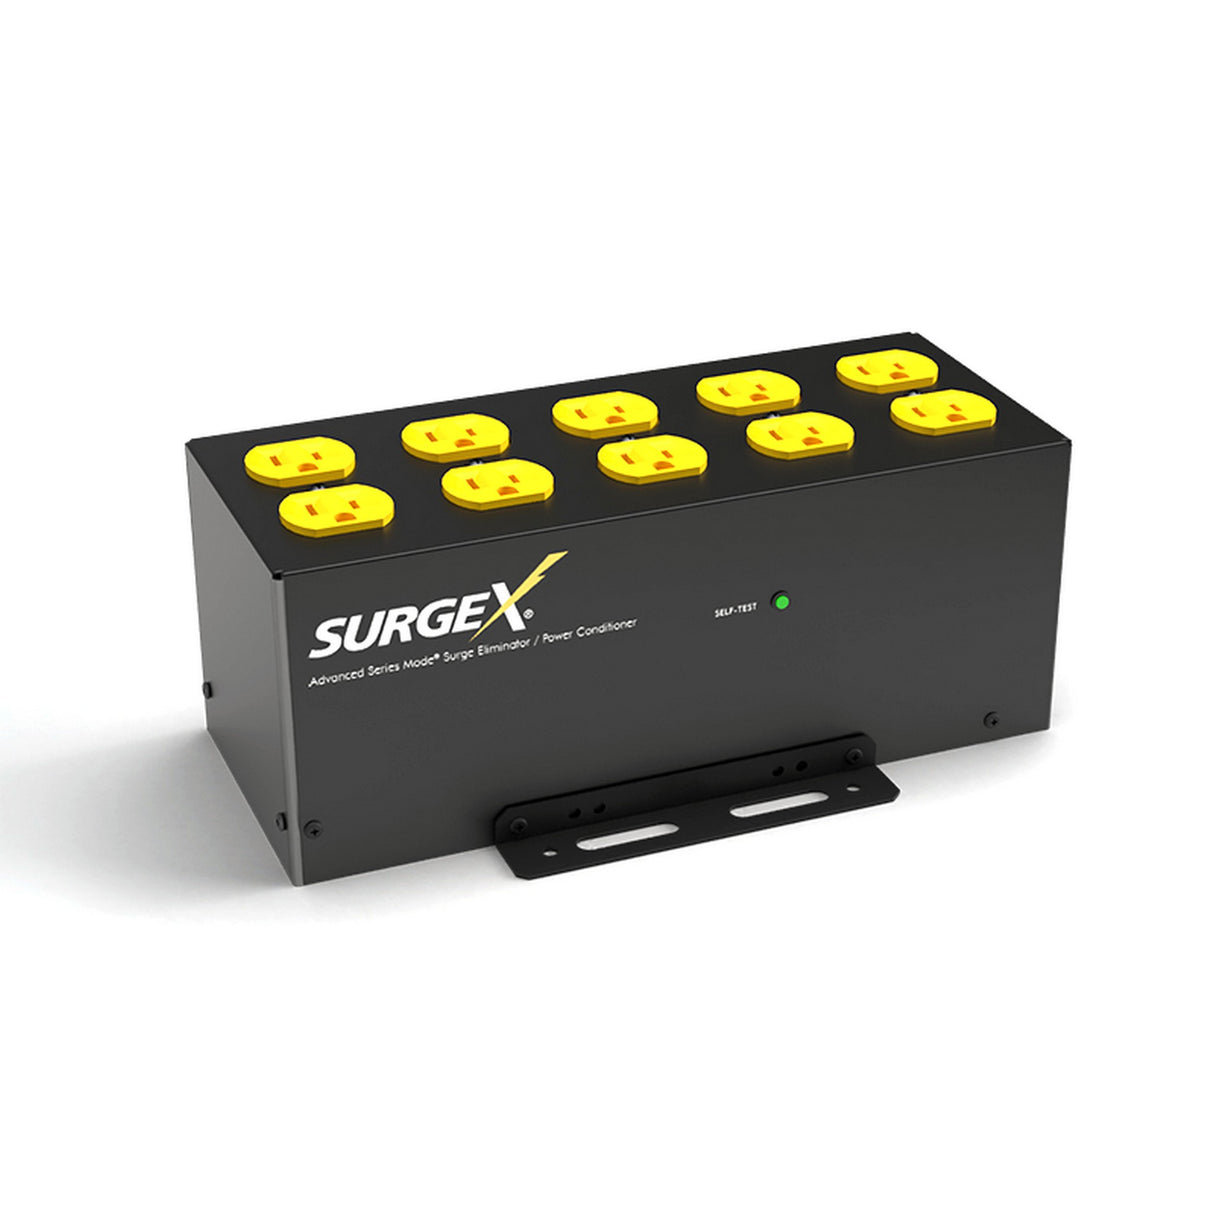 SurgeX SA-1810 10 Receptacle Standalone Surge Eliminator and Power Conditioner, 120V/15A